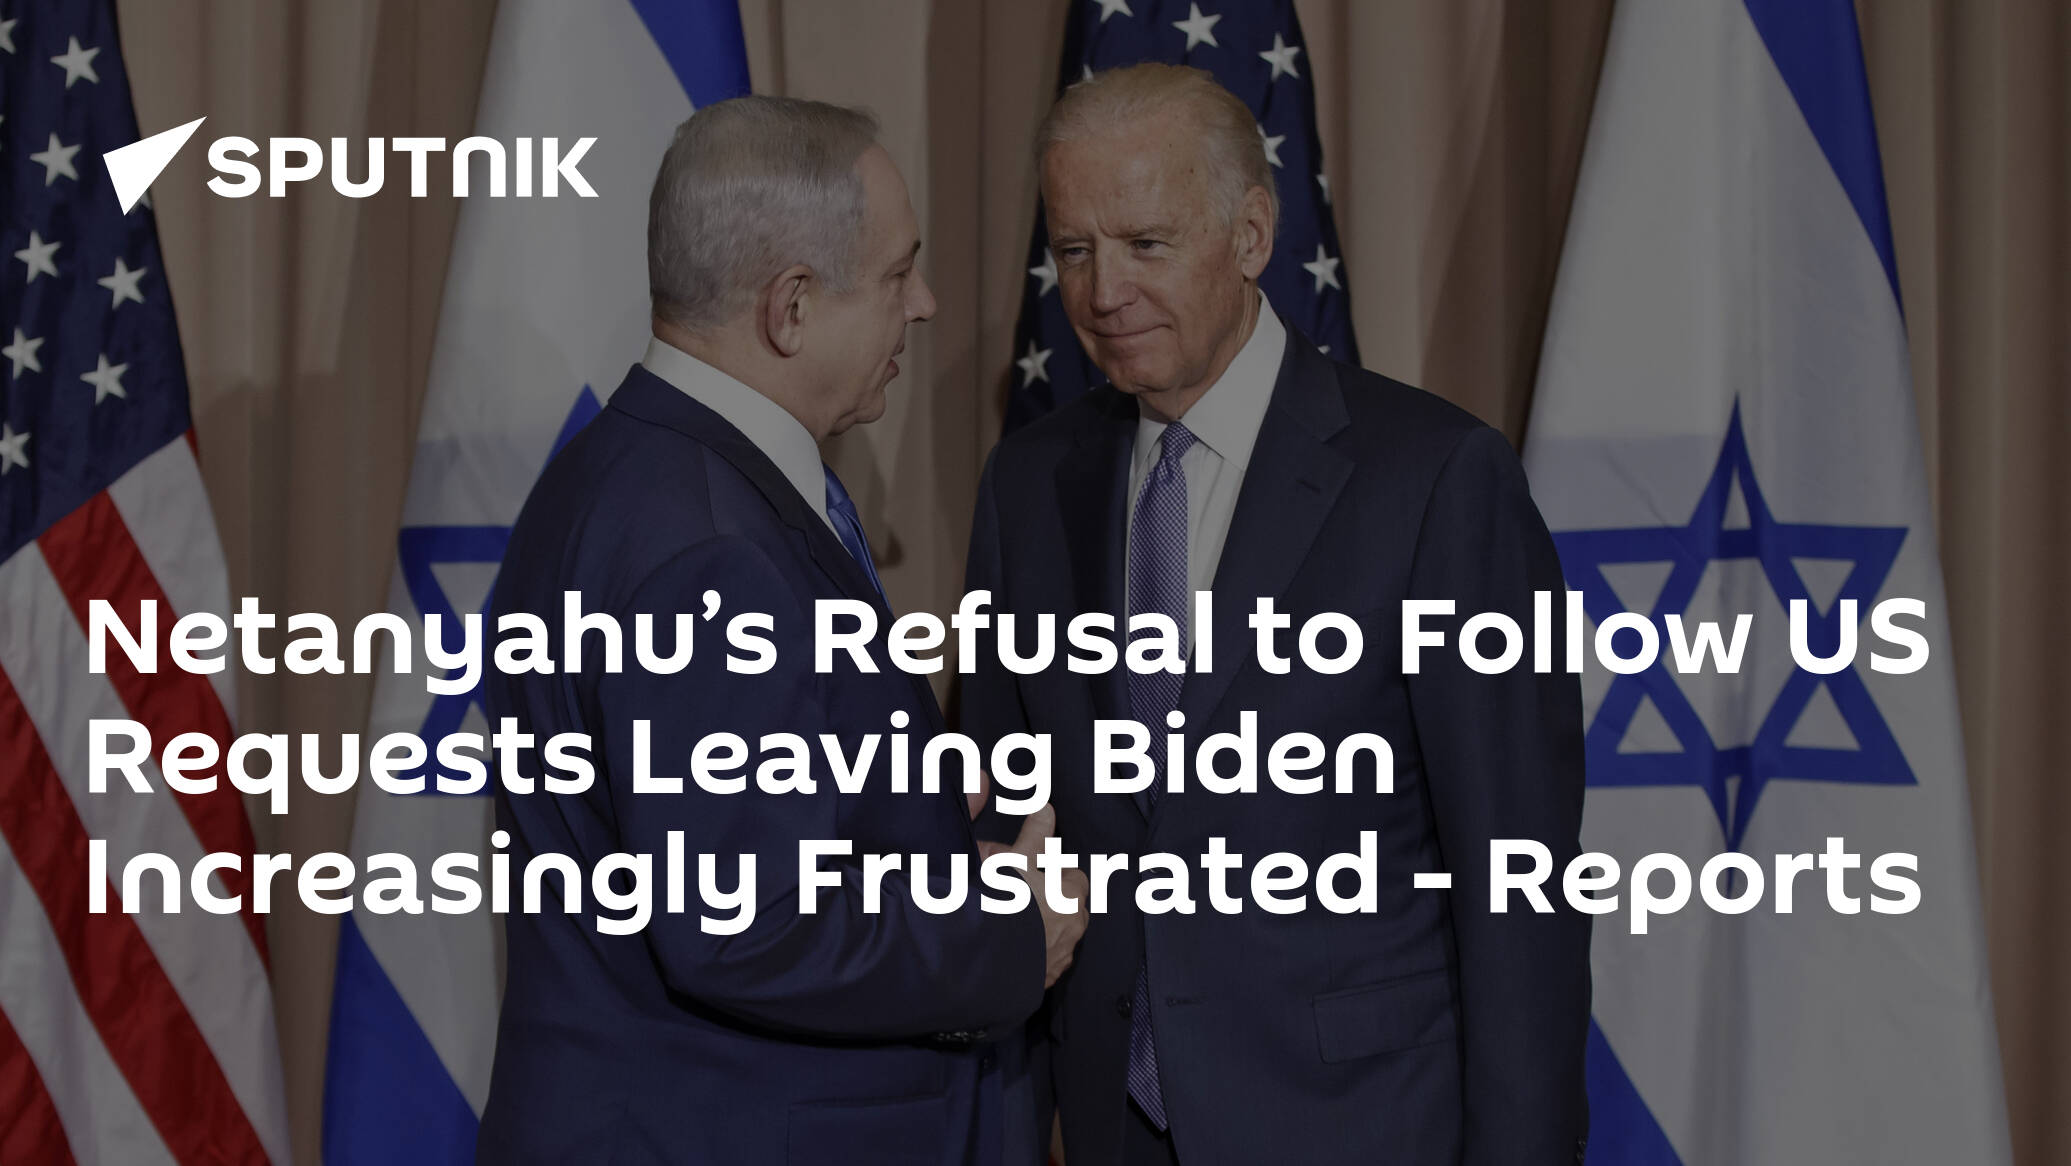 Netanyahu’s Refusal to Follow US Requests Leaving Biden Increasingly Frustrated – Reports